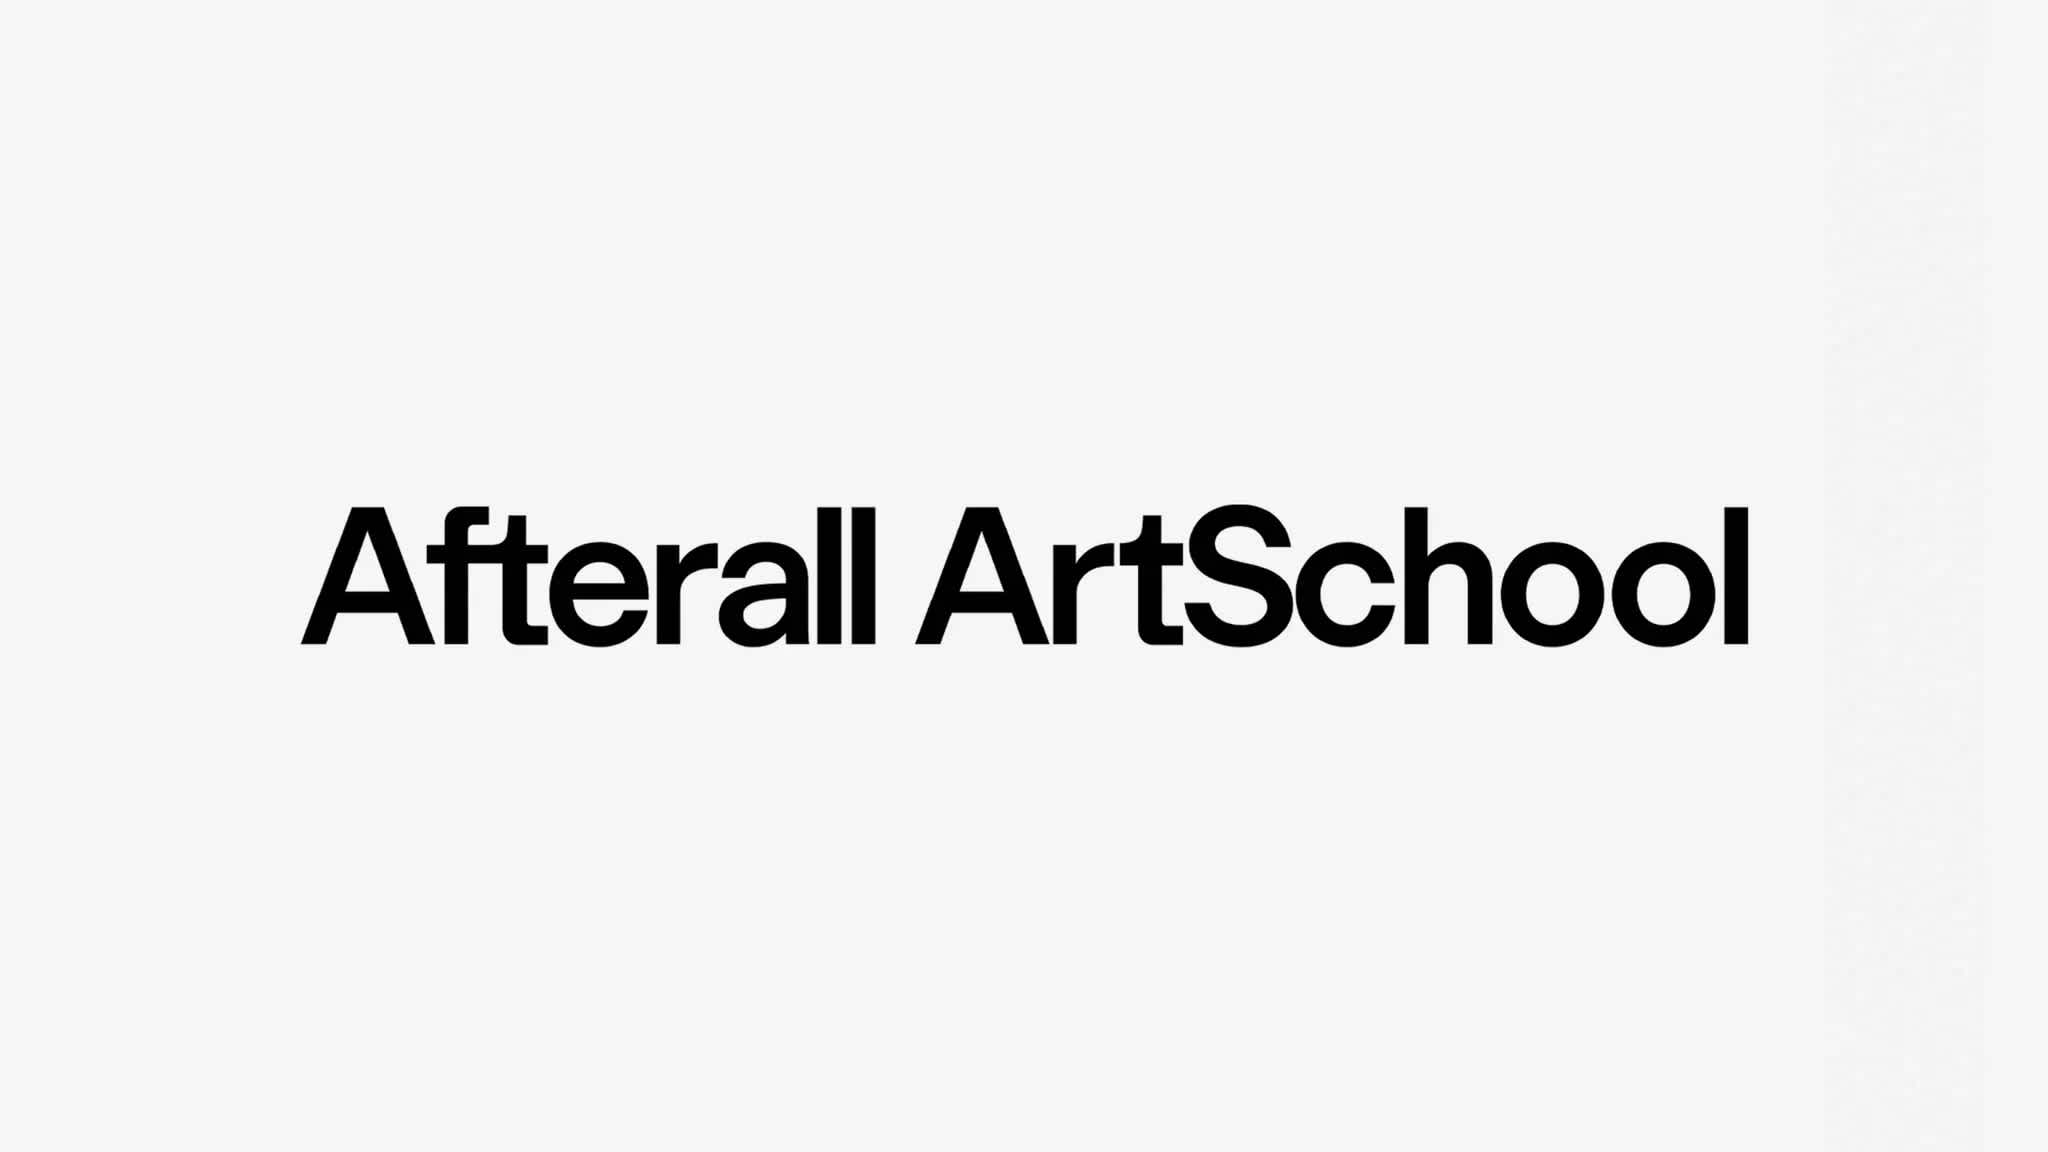 The title, "Afterall ArtSchool" runs horizontally across a white background. The letters are type in black sans serif letters.